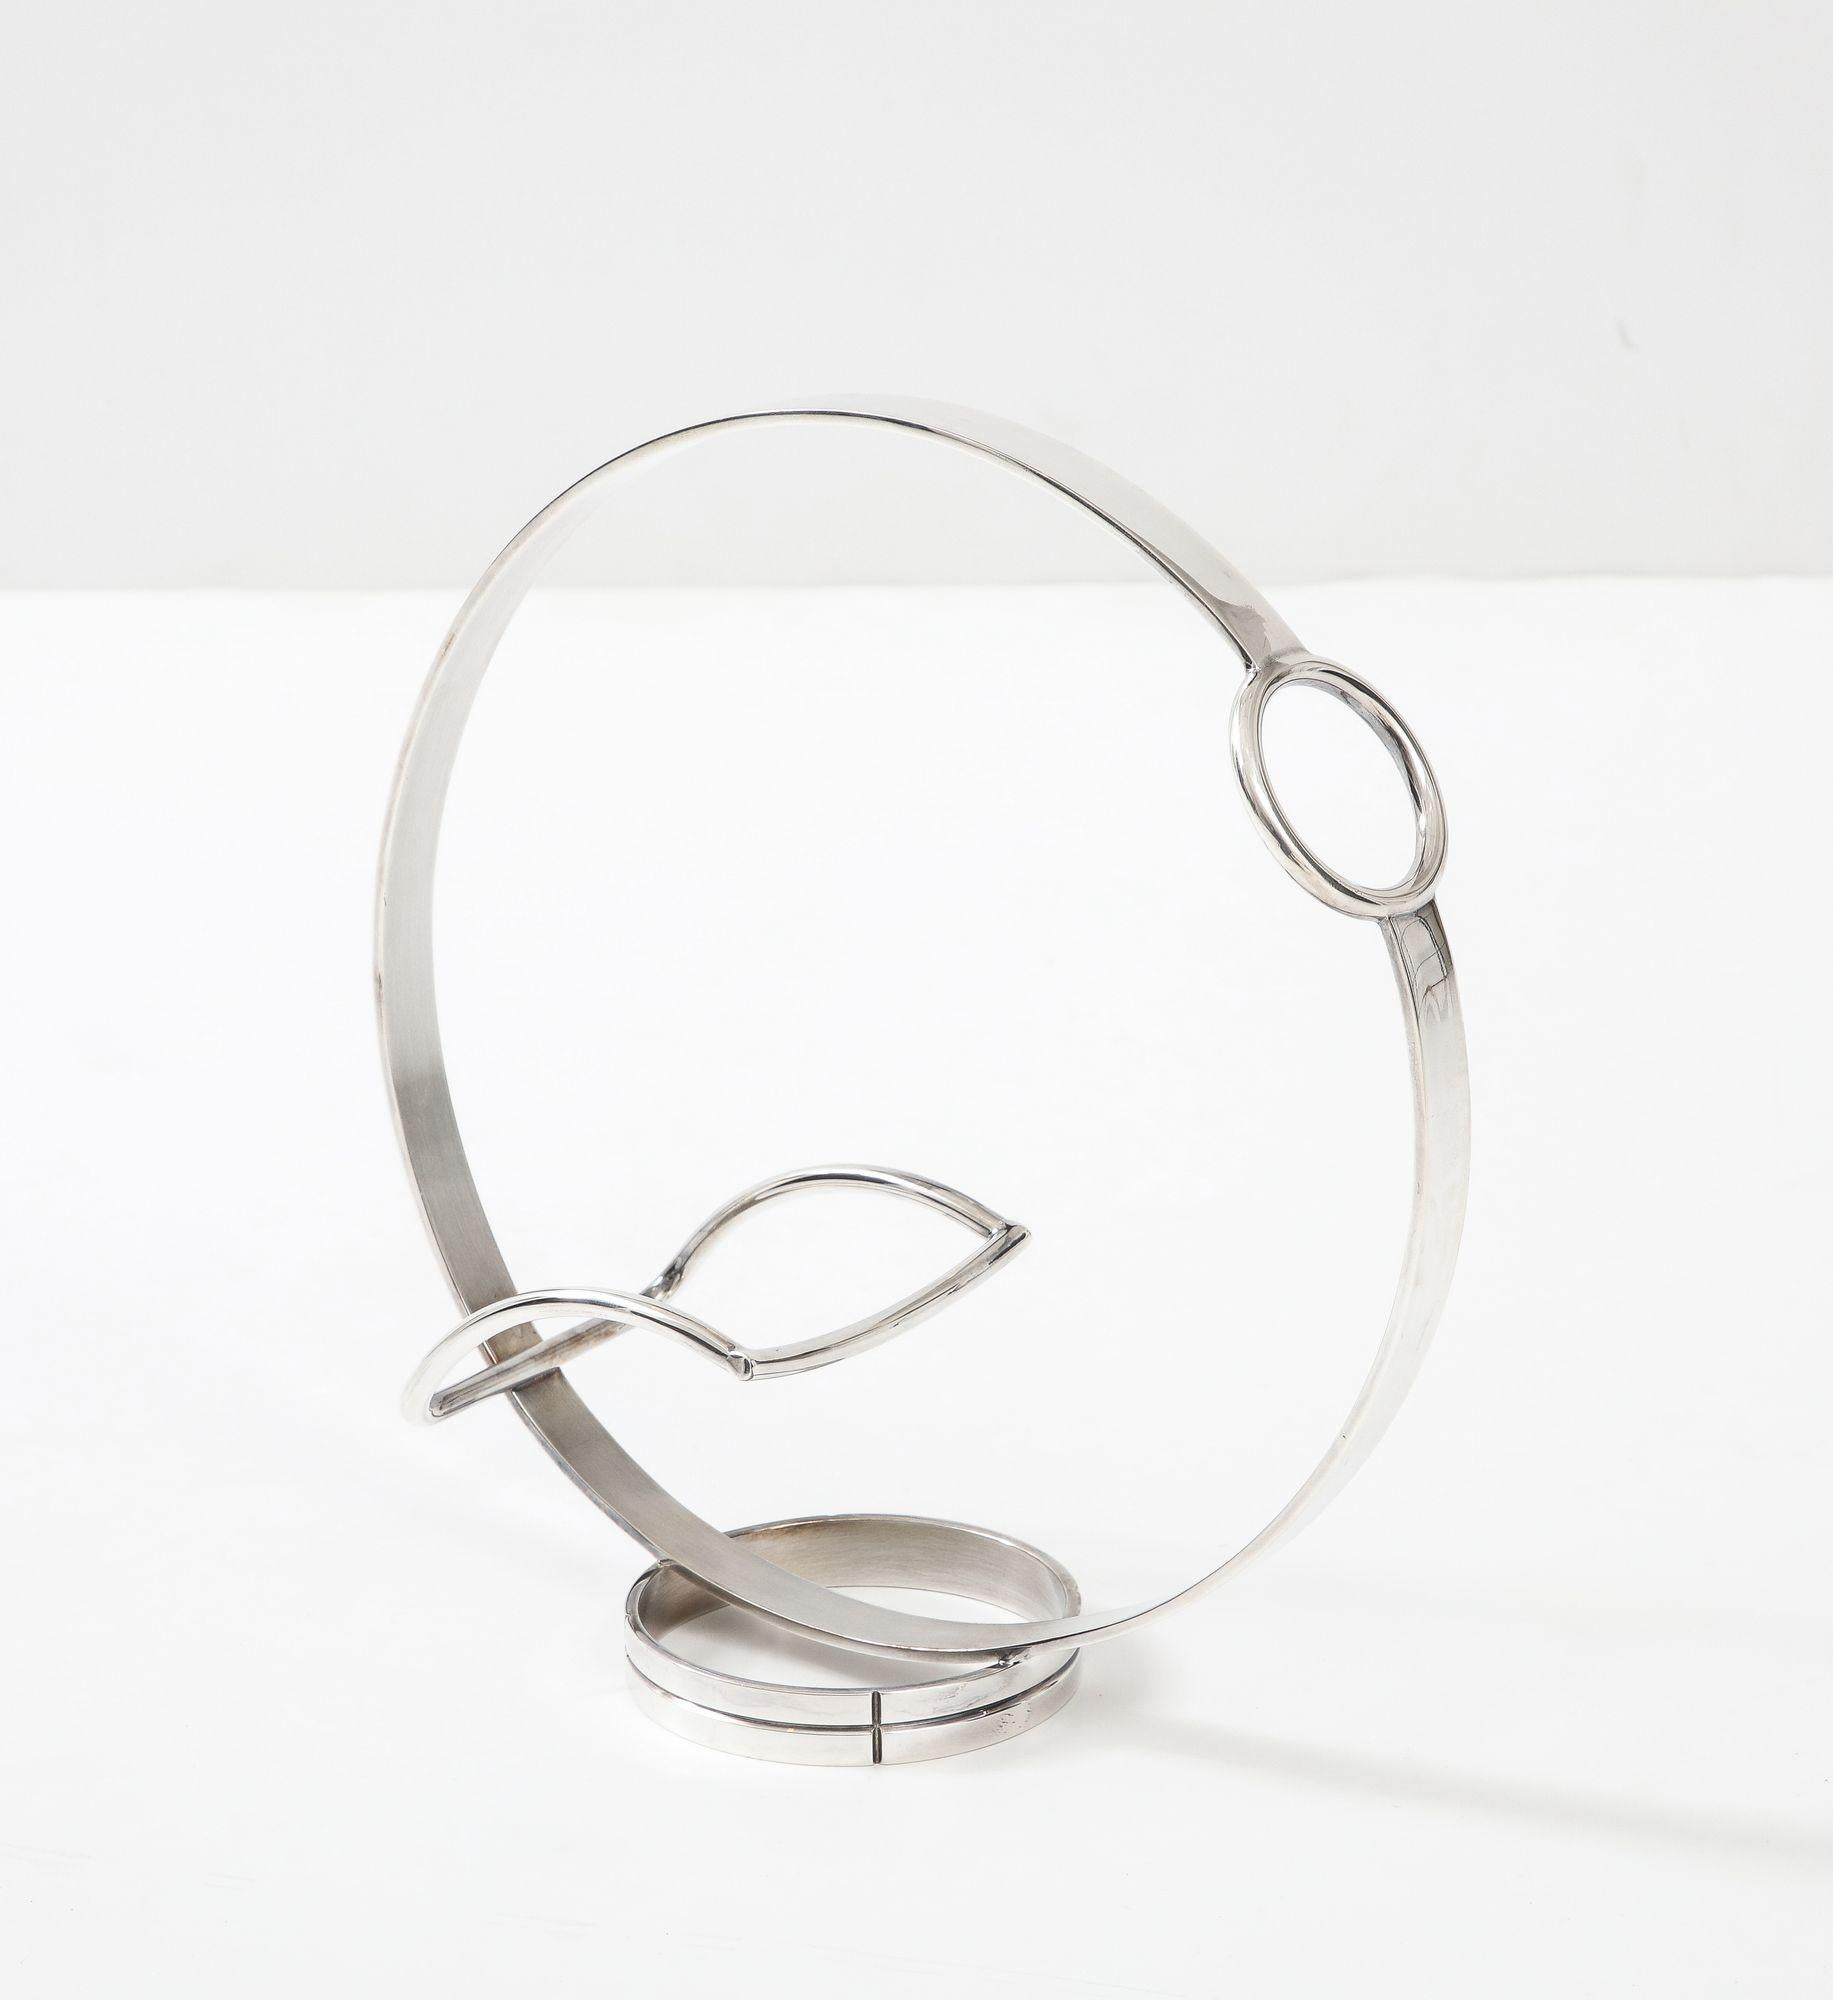 A stylish modern Christofle silver plated wine holder designed by Andre Putnam.